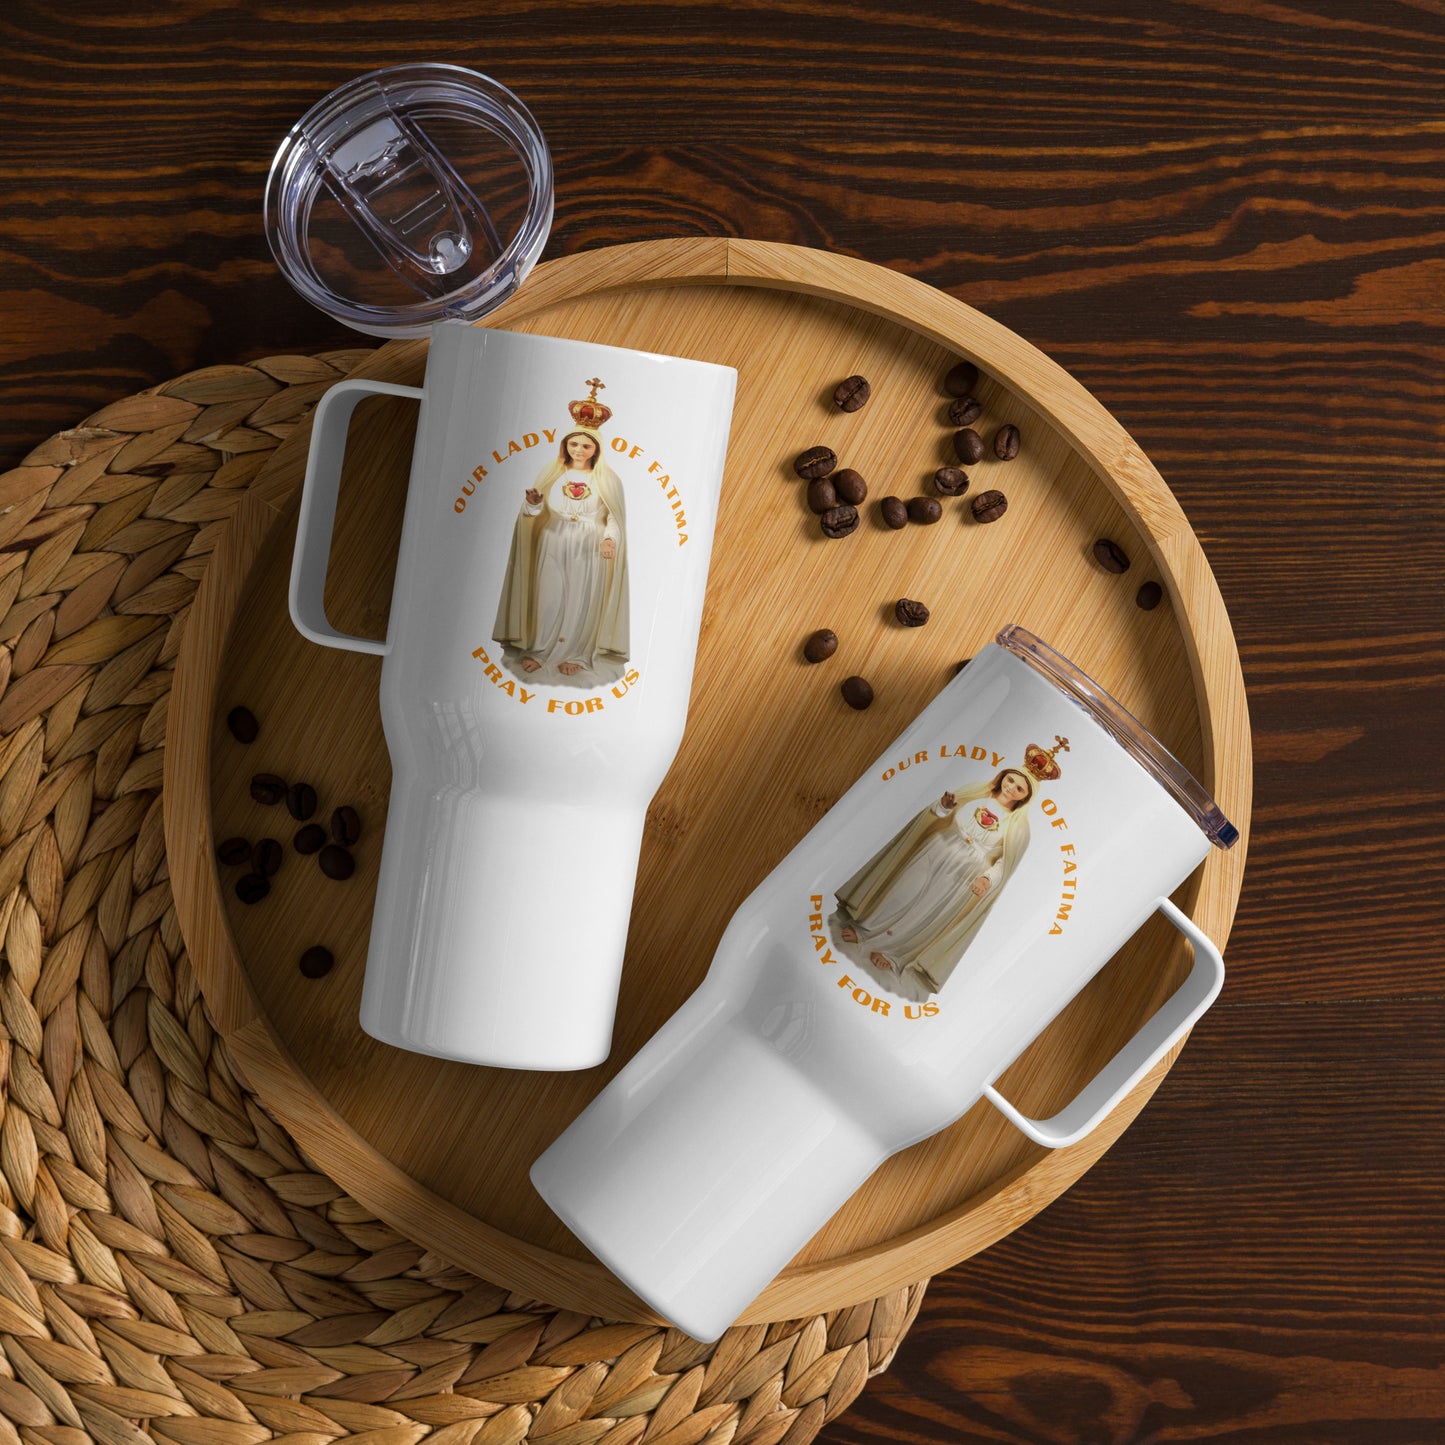 Our Lady of Fatima Pray for Us Travel mug with a handle